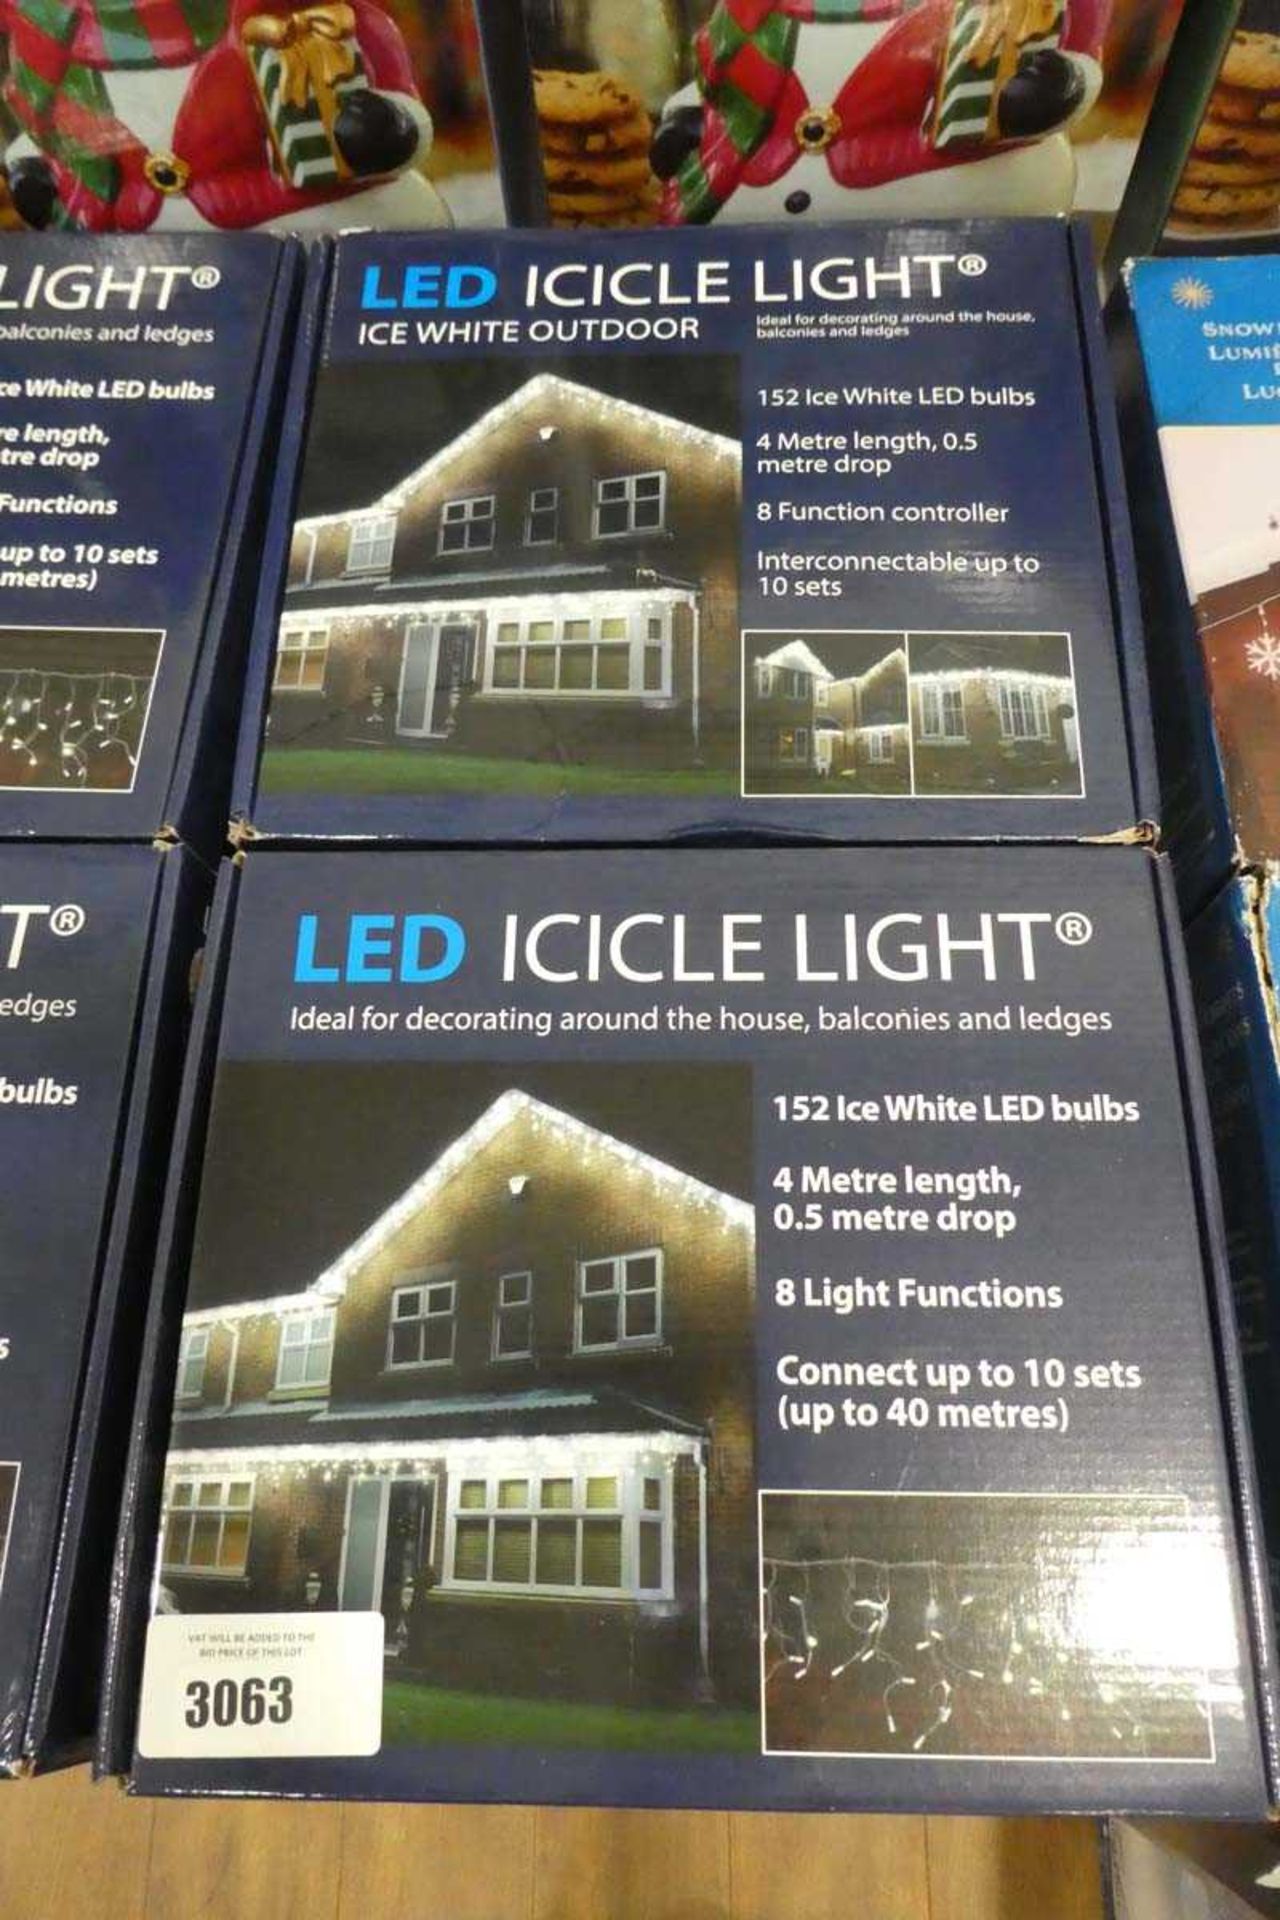 +VAT 2 boxed sets of LED icicle lights (4m length, 0.5m drop, 8 light functions)